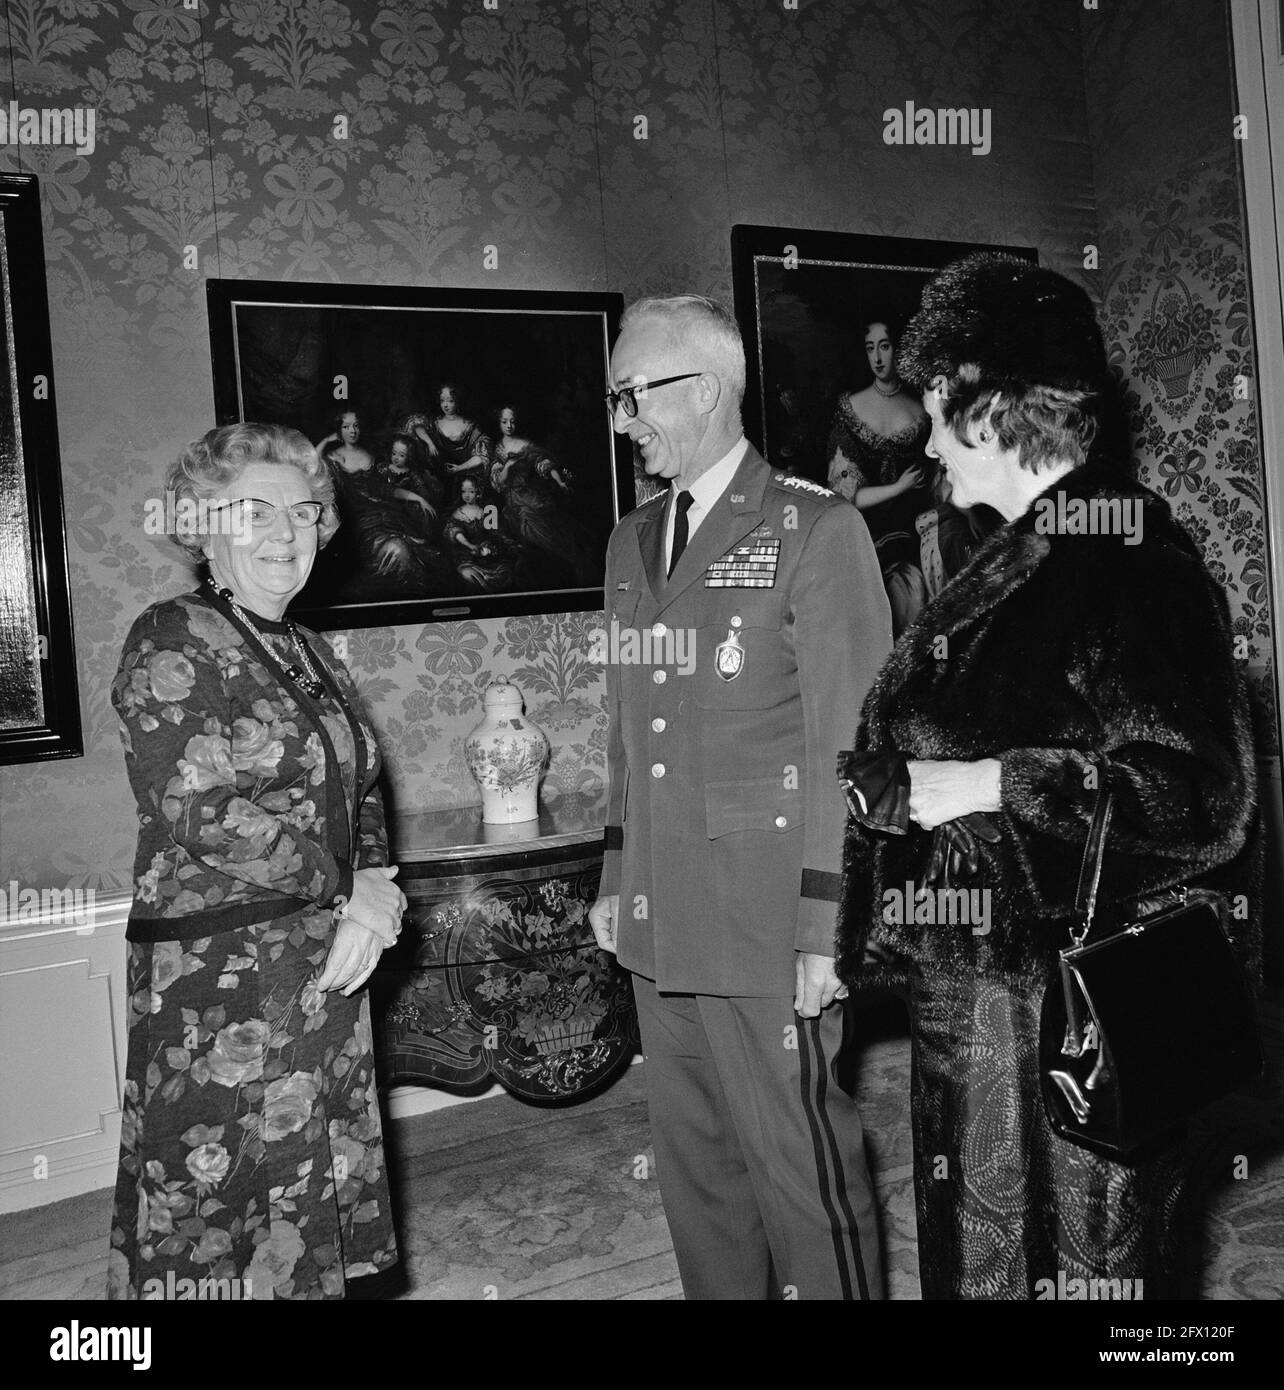 Queen Juliana receives at Huis ten Bosch General Goodpaster (Supreme Commander NATO) and his wife, 18 November 1974, generals, queens, paintings, The Netherlands, 20th century press agency photo, news to remember, documentary, historic photography 1945-1990, visual stories, human history of the Twentieth Century, capturing moments in time Stock Photo